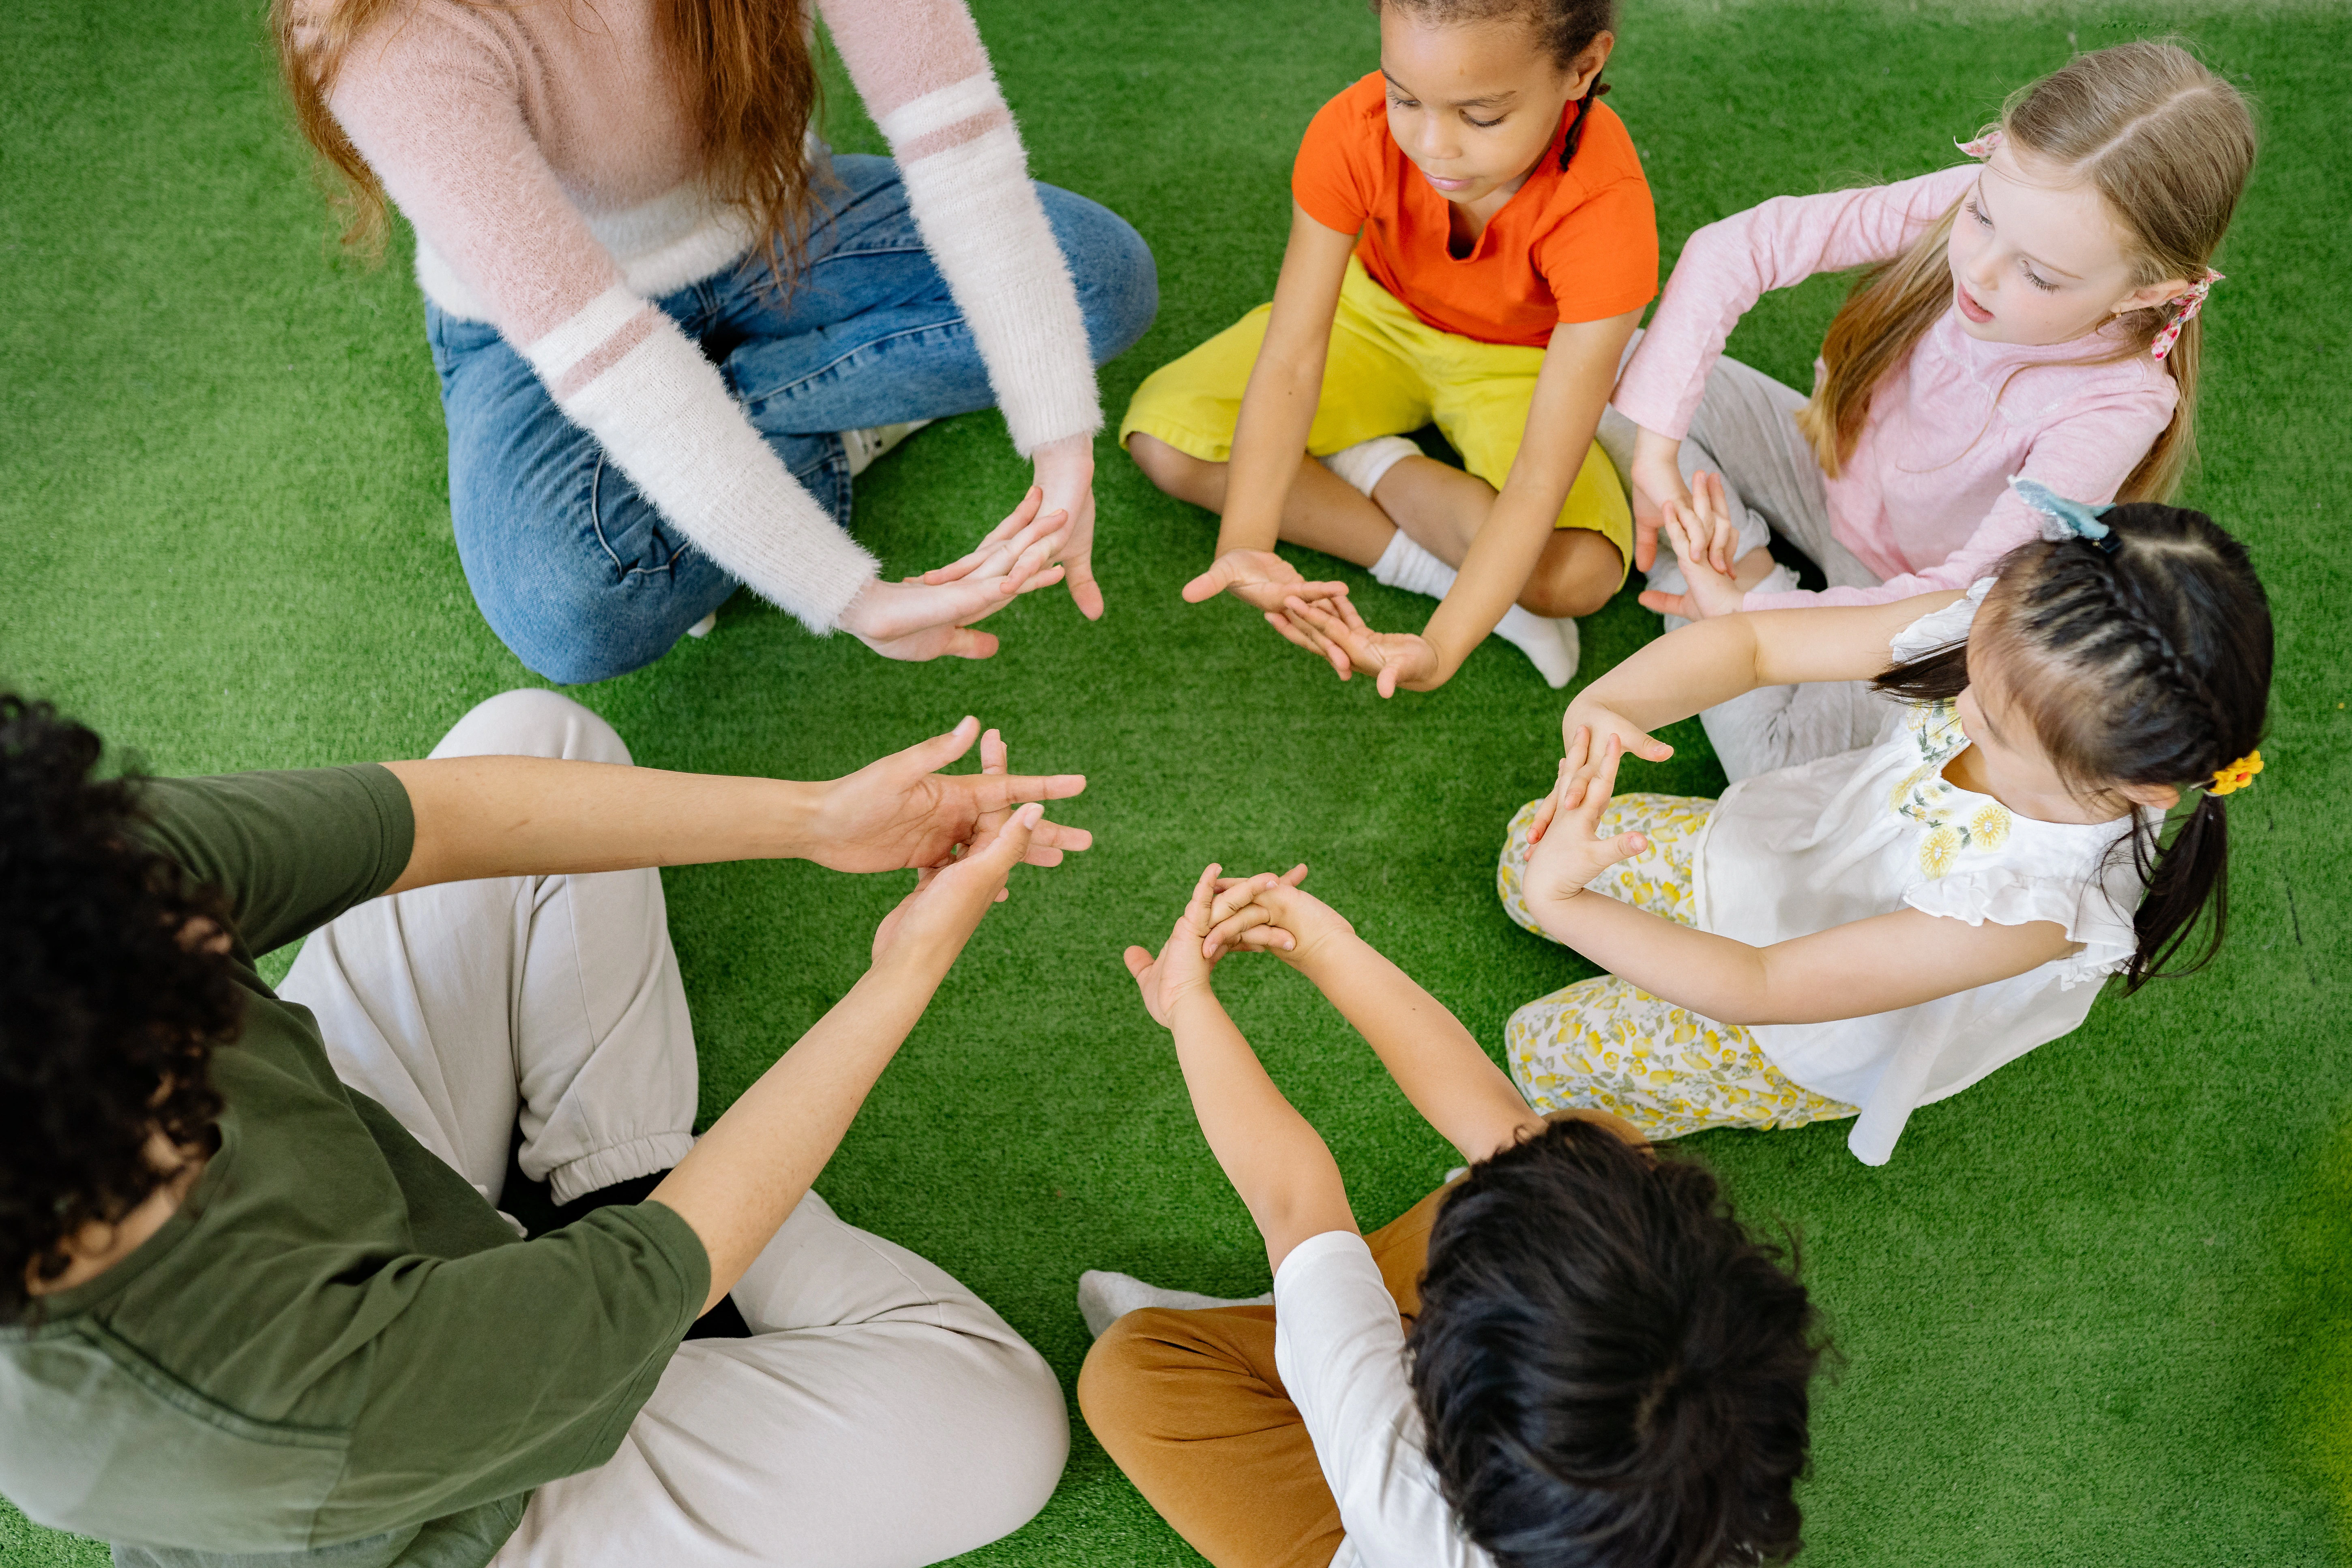 There are compelling reasons for small businesses, mid-size organizations, and large companies to provide comprehensive childcare benefits for employees.